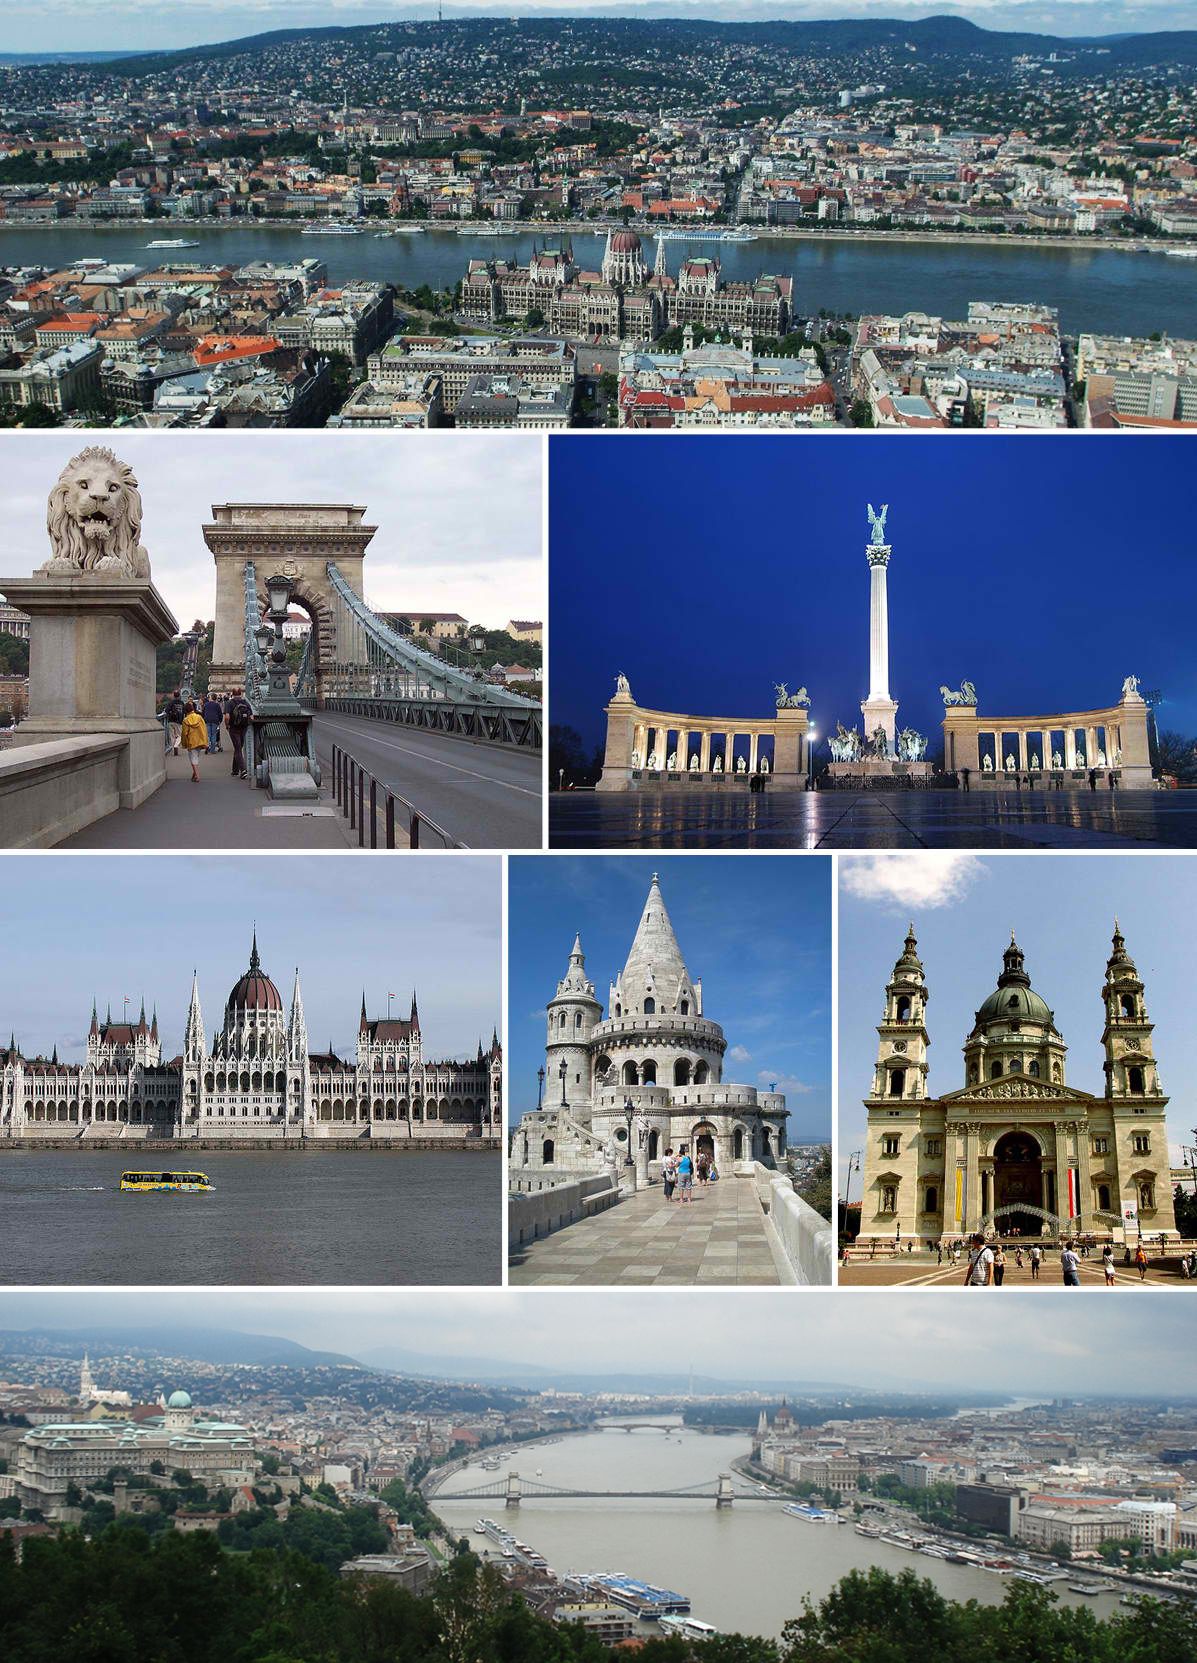 BUDAPEST MONTAGE {} From top, left to right: view of the city with ...